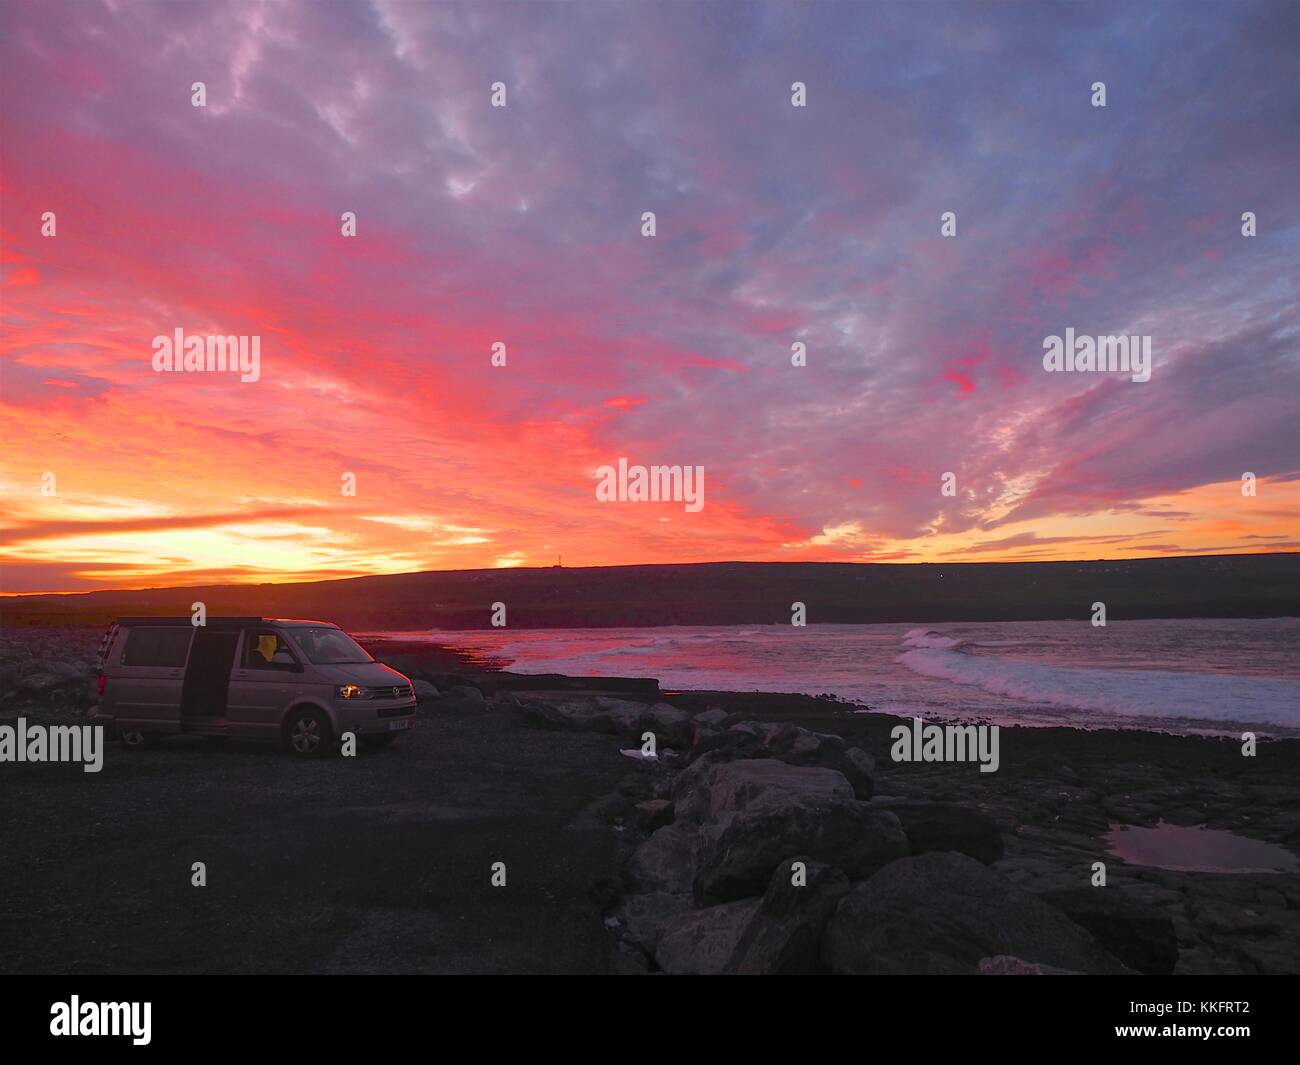 The sun rises over the Wild Atlantic Way at Doolin Pier, County Clare, Ireland turning the rock pools a sunburst red. Stock Photo